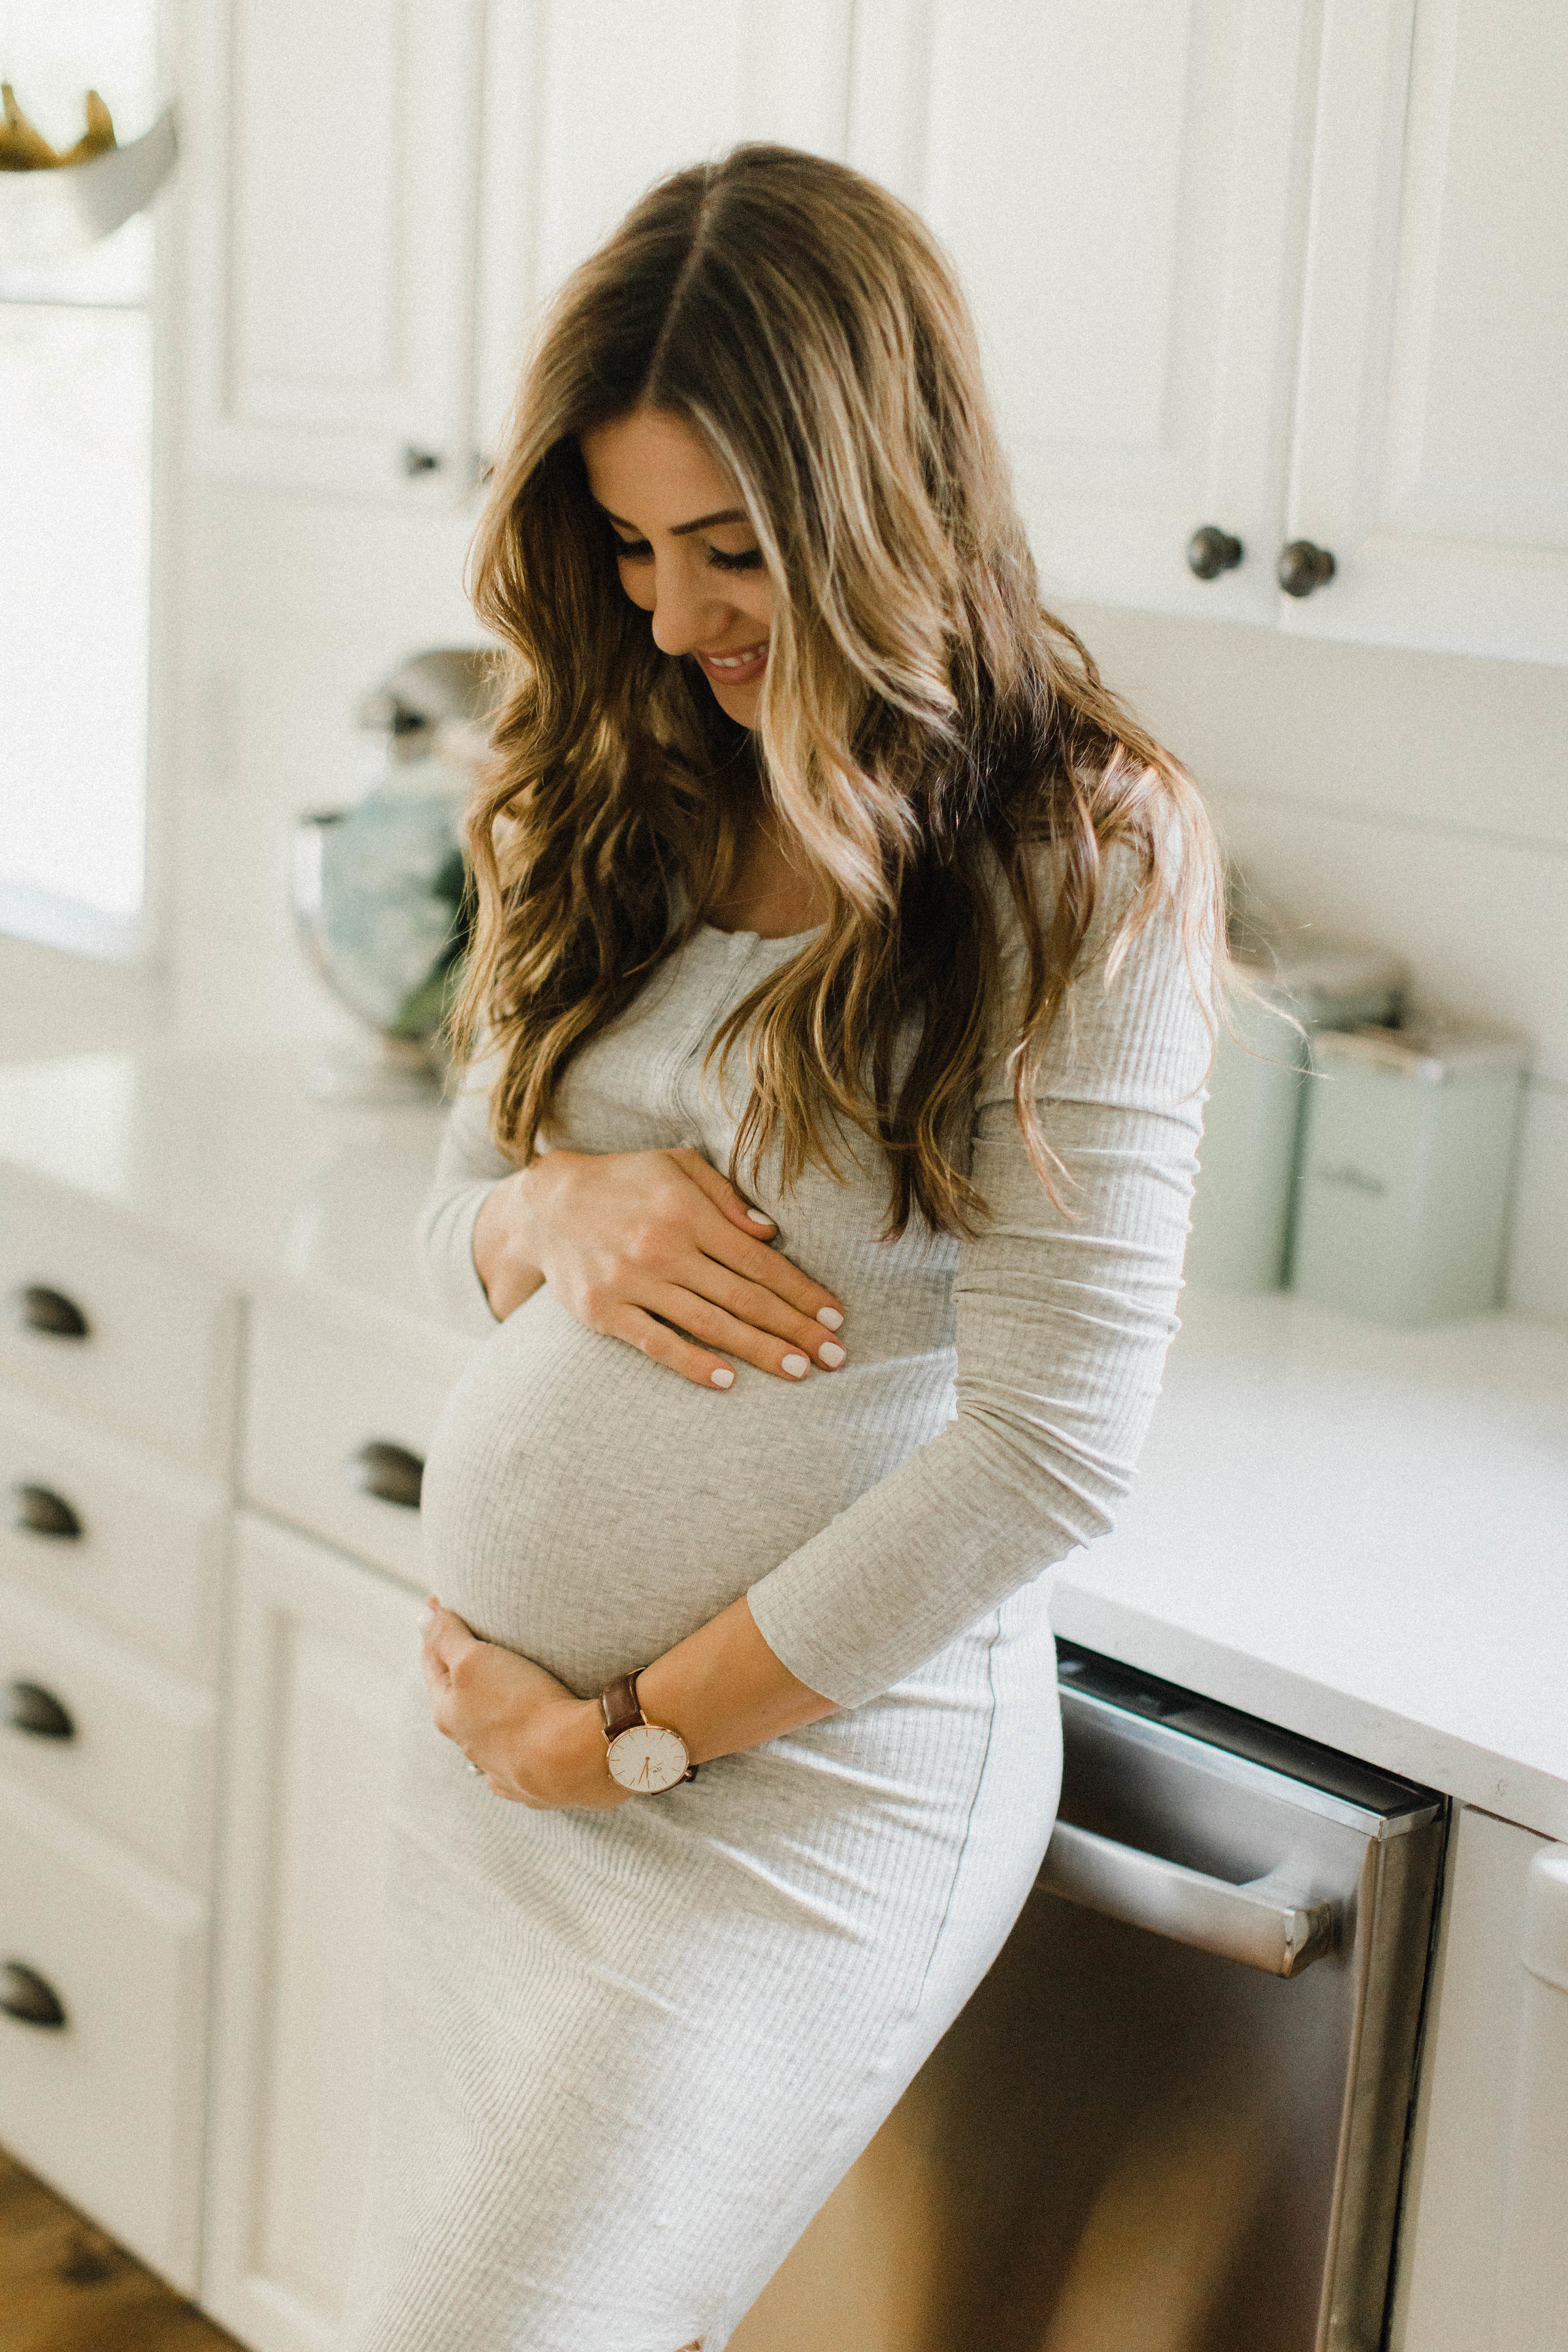 Connecticut life and style blogger Lauren McBride shares the essential nutrients during pregnancy that will keep you and baby happy and healthy.